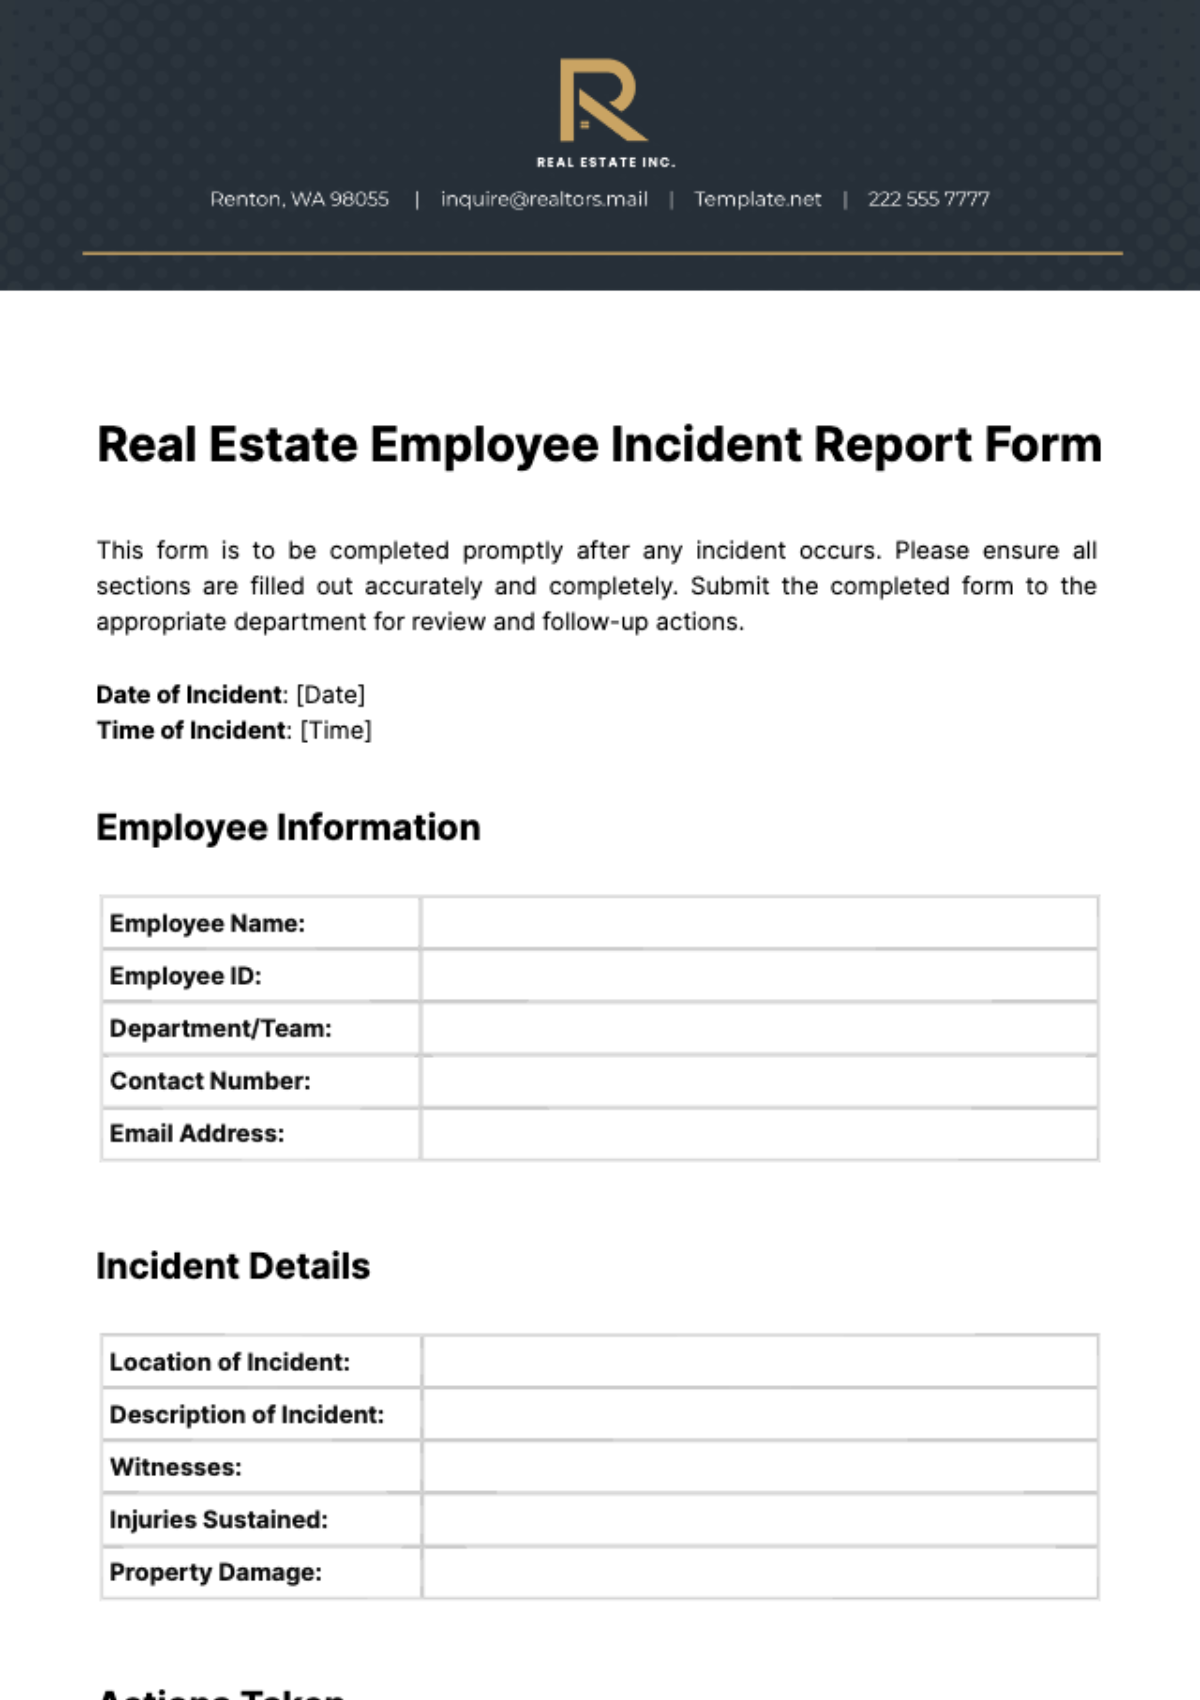 Real Estate Employee Incident Report Form Template